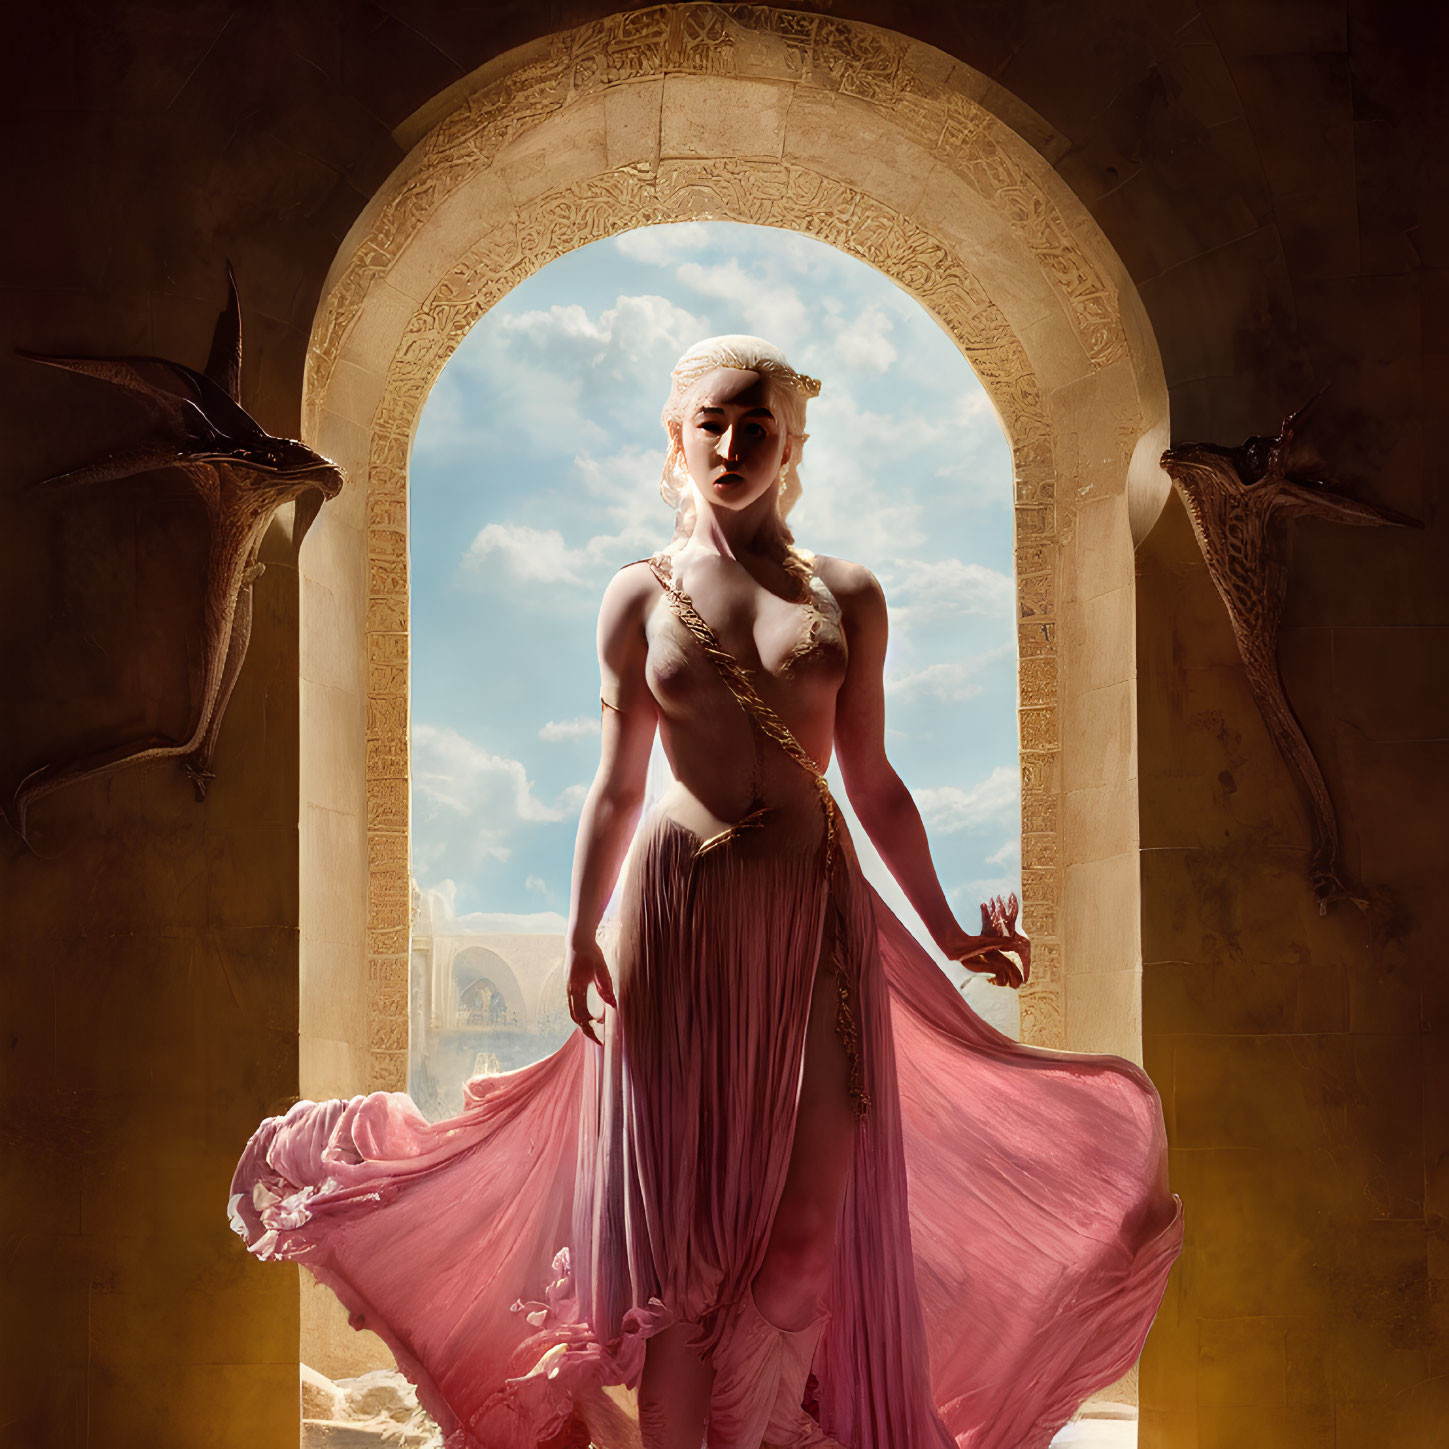 Woman in Pink Dress with Dragons in Fantasy Archway Setting